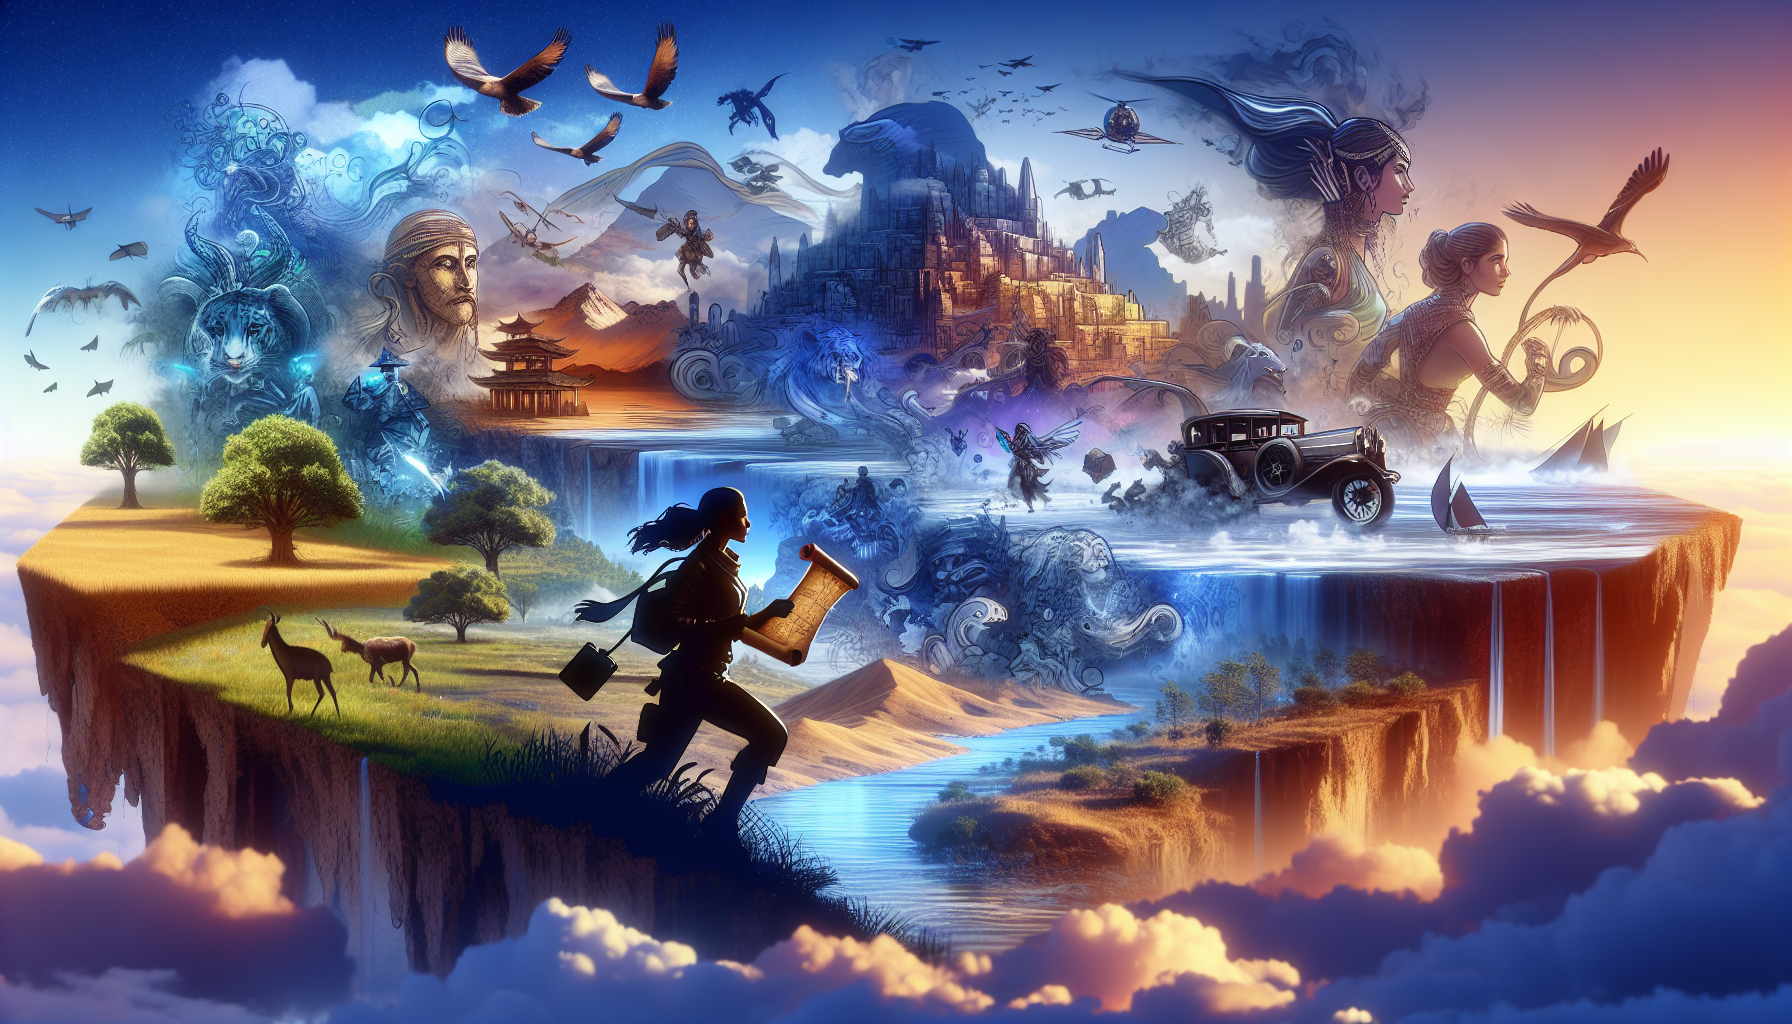 An imaginative landscape showing a vast open world with various iconic scenes from famous adventure movies integrated seamlessly into it, including a hidden ancient temple, a treasure map held by a bo